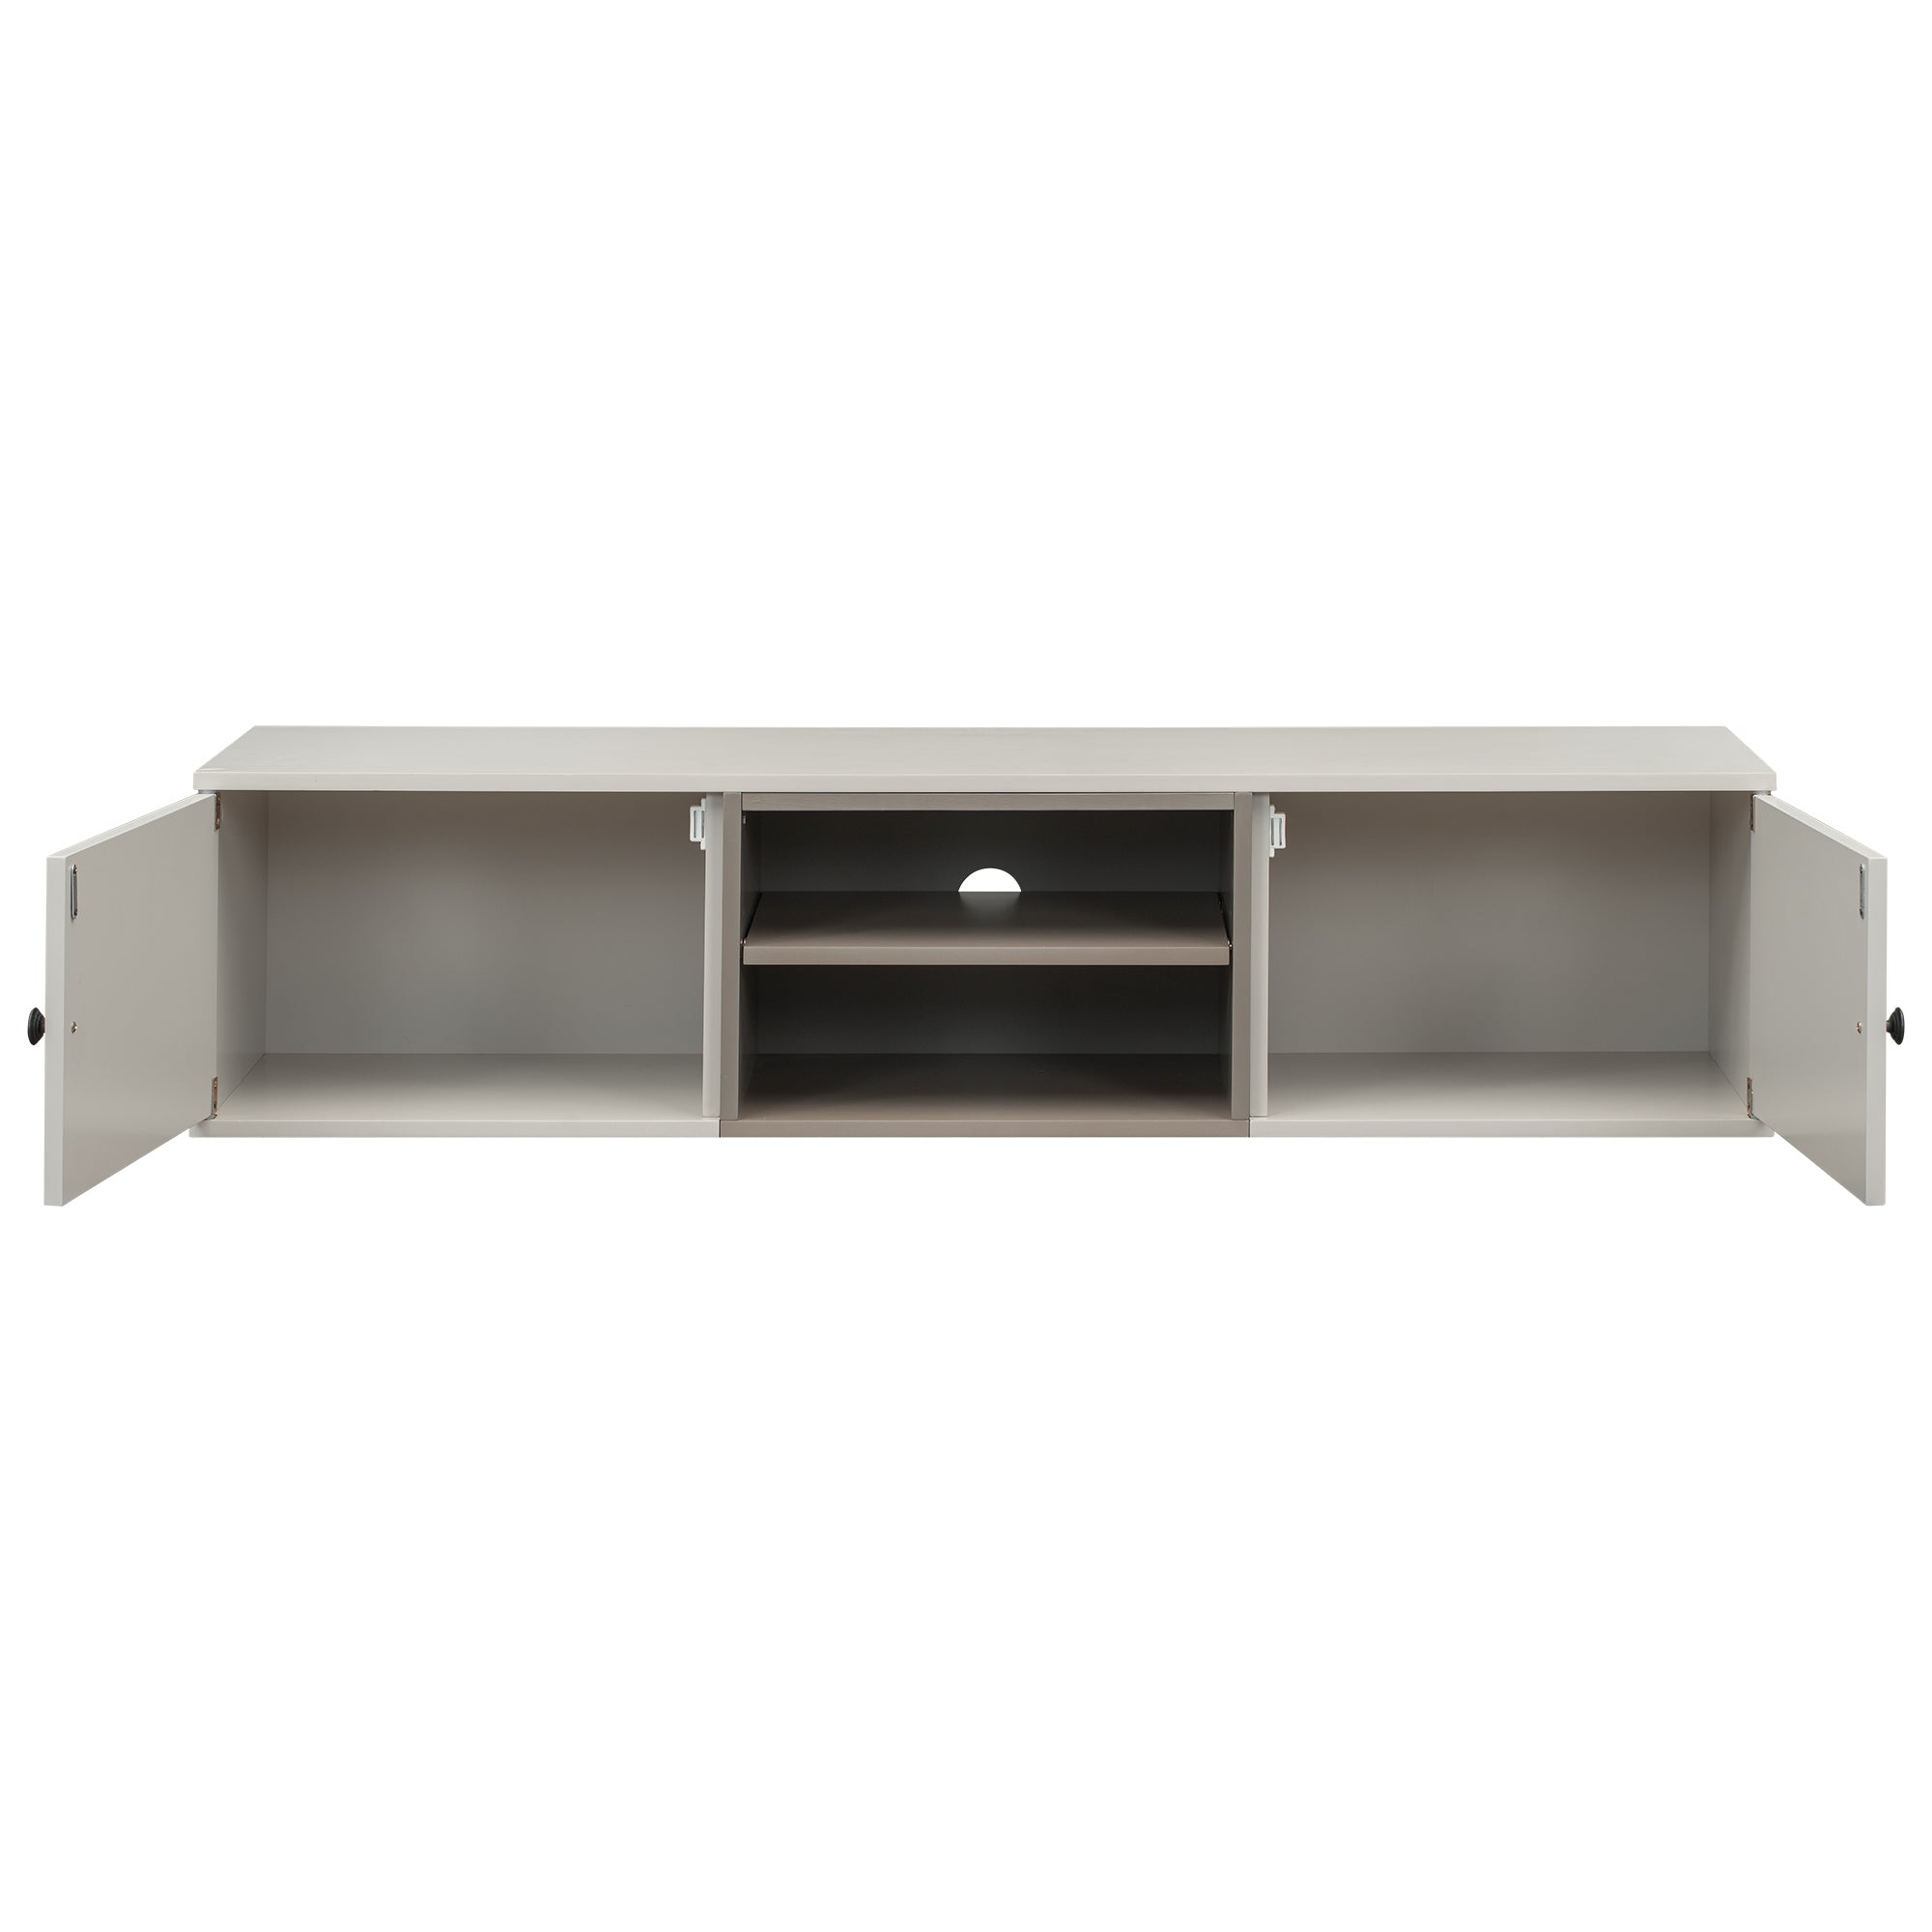 ZNTS Wall Mounted 65" Floating TV Stand with Large Storage Space, 3 Levels Adjustable shelves, Magnetic WF302838AAD